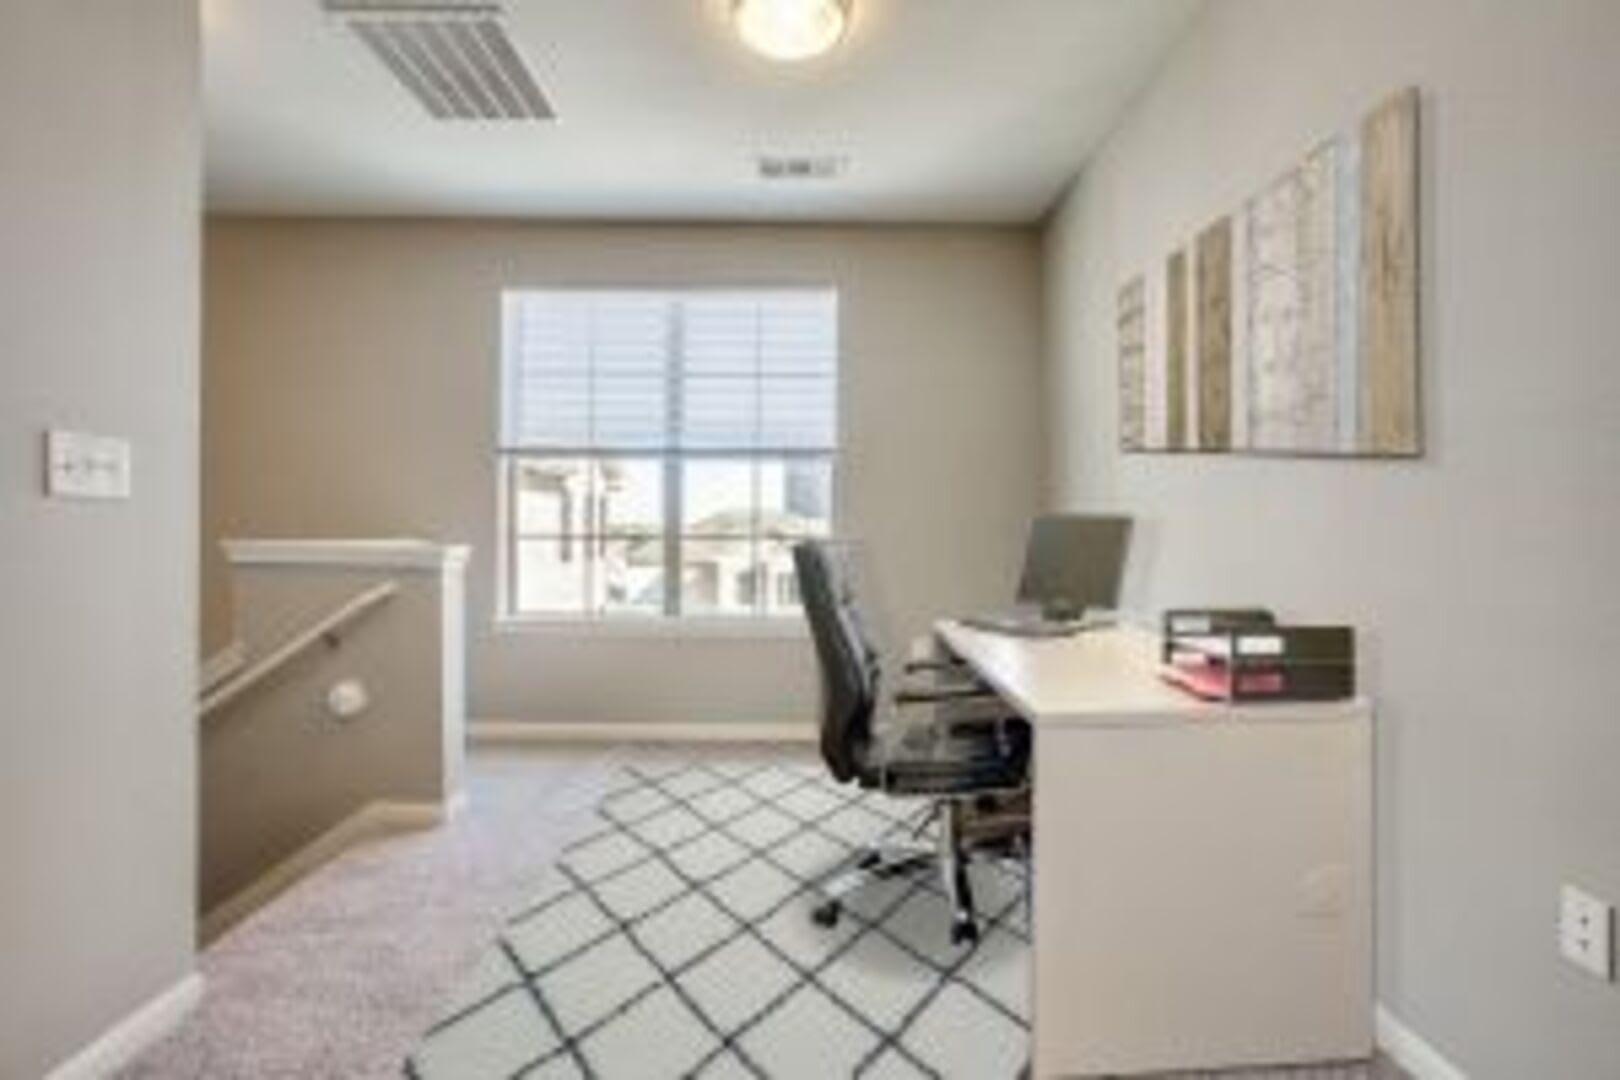 Model home's office area at Parkside Towns in Richardson, Texas